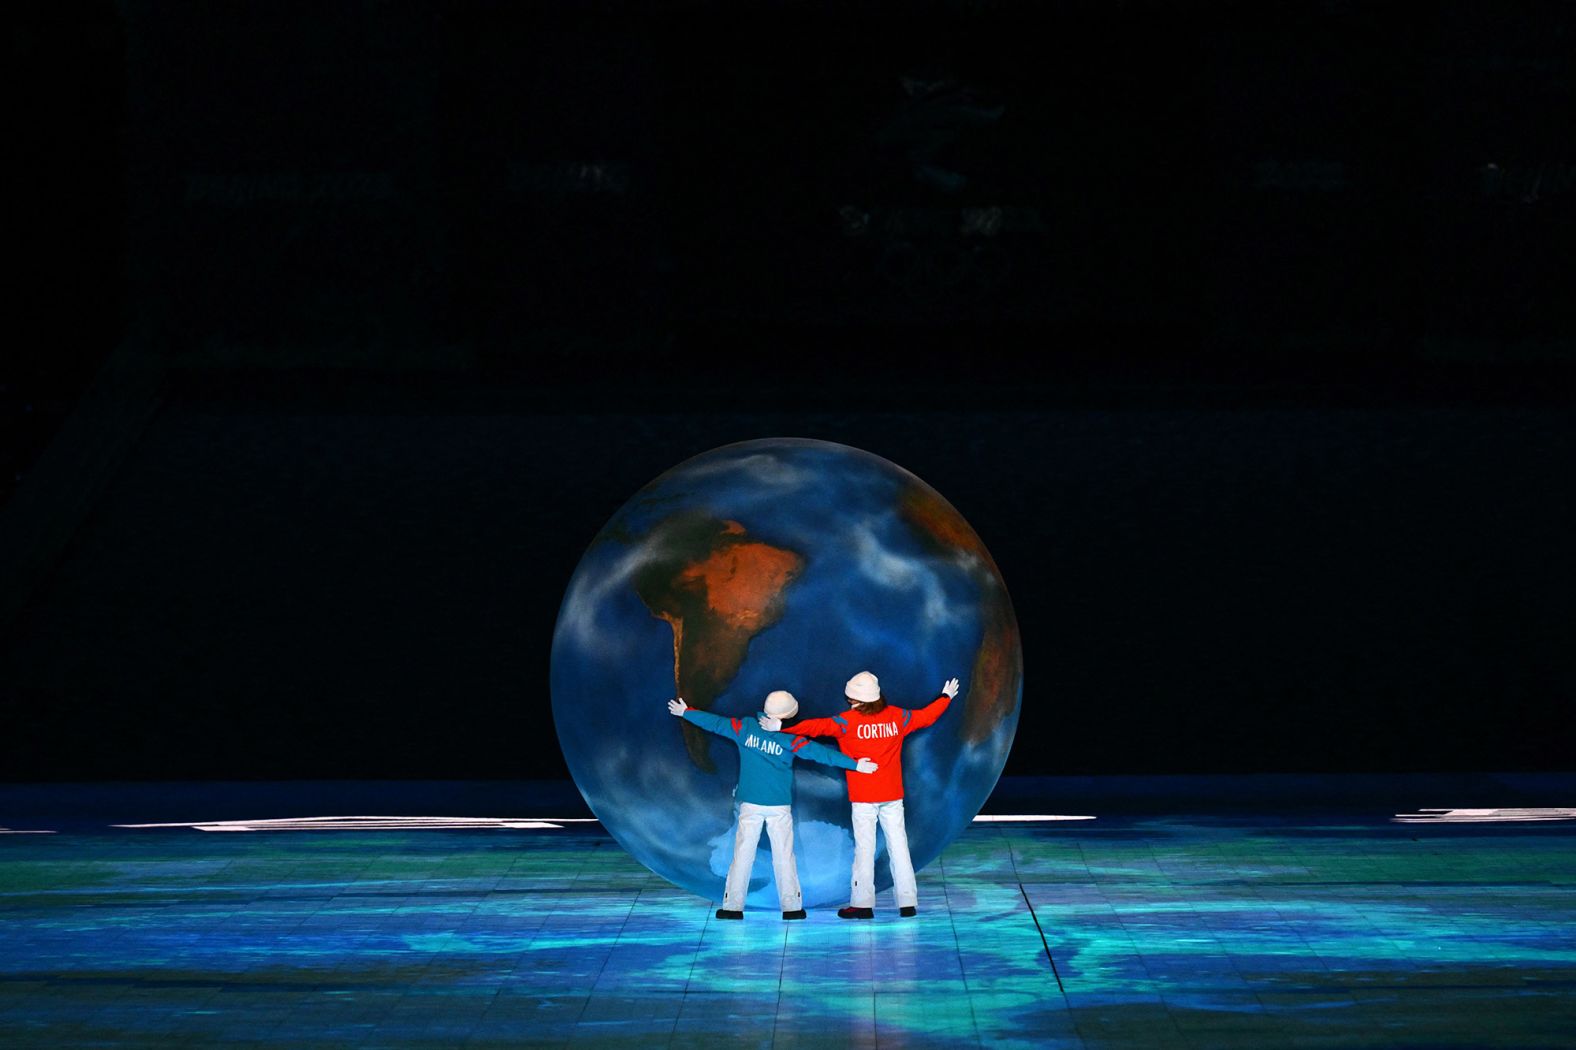 Children representing Milan and Cortina d'Ampezzo hug a globe as part of <a href="index.php?page=&url=https%3A%2F%2Fwww.cnn.com%2Fworld%2Flive-news%2Fbeijing-winter-olympics-02-20-22-spt%2Fh_143bc328e23c674b7b705ce46c510cdf" target="_blank">the Olympic handover.</a>